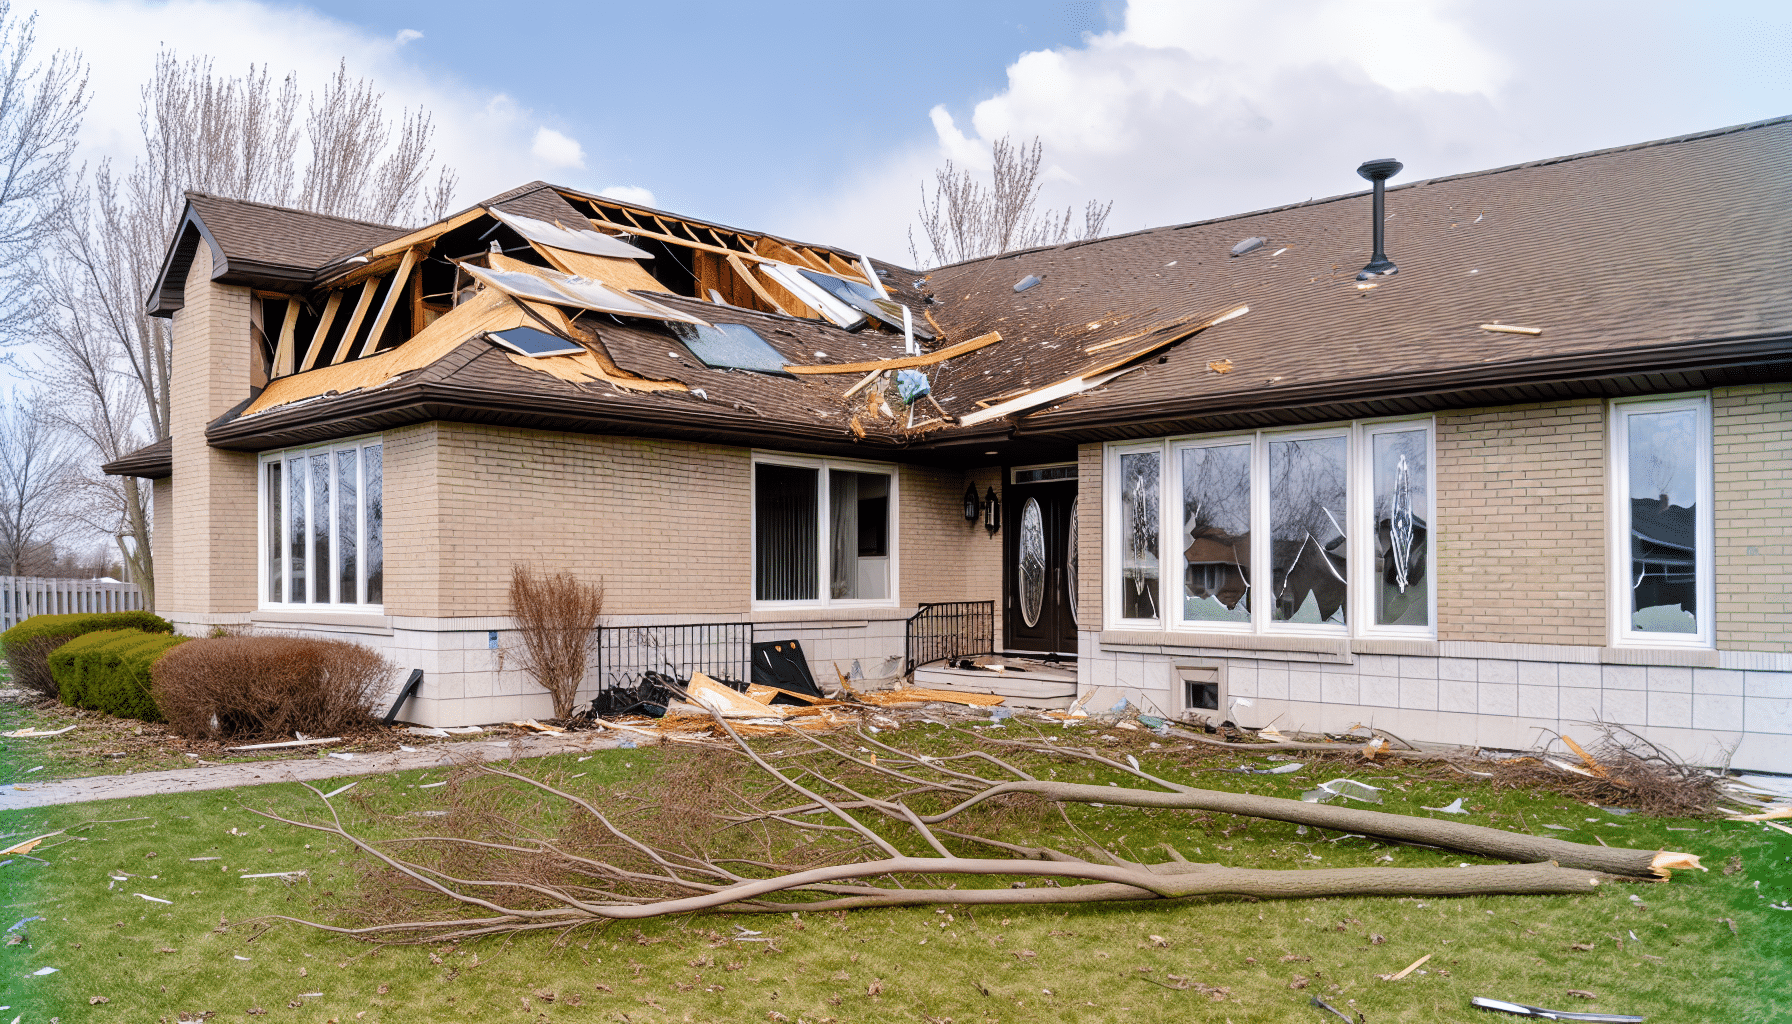 A photo showing the extent of storm damage to a property